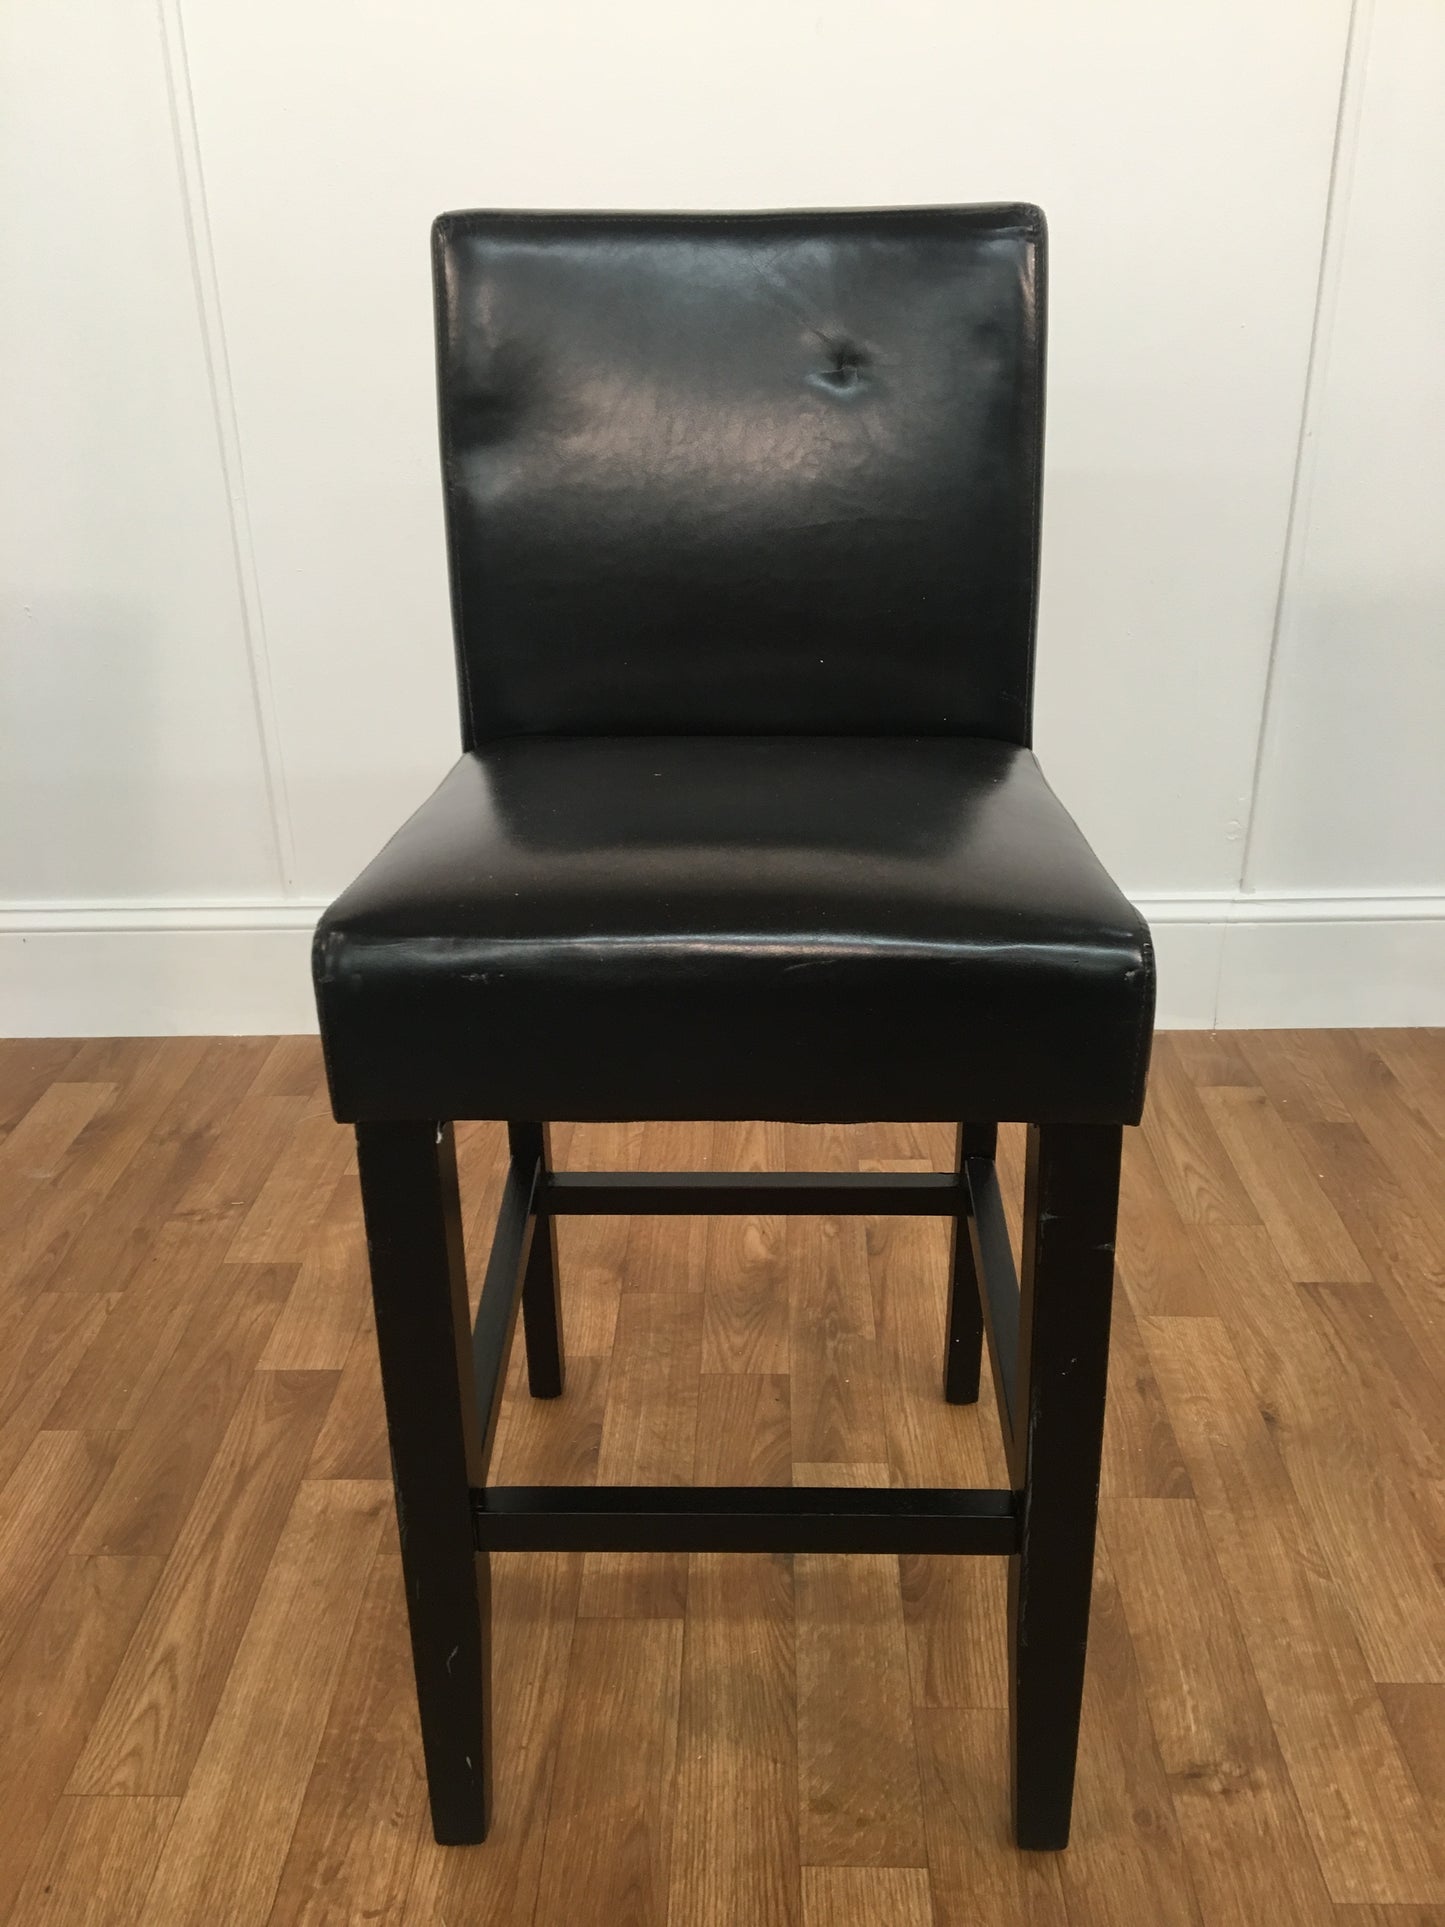 BLACK LEATHER LEATHER HIGH CHAIR